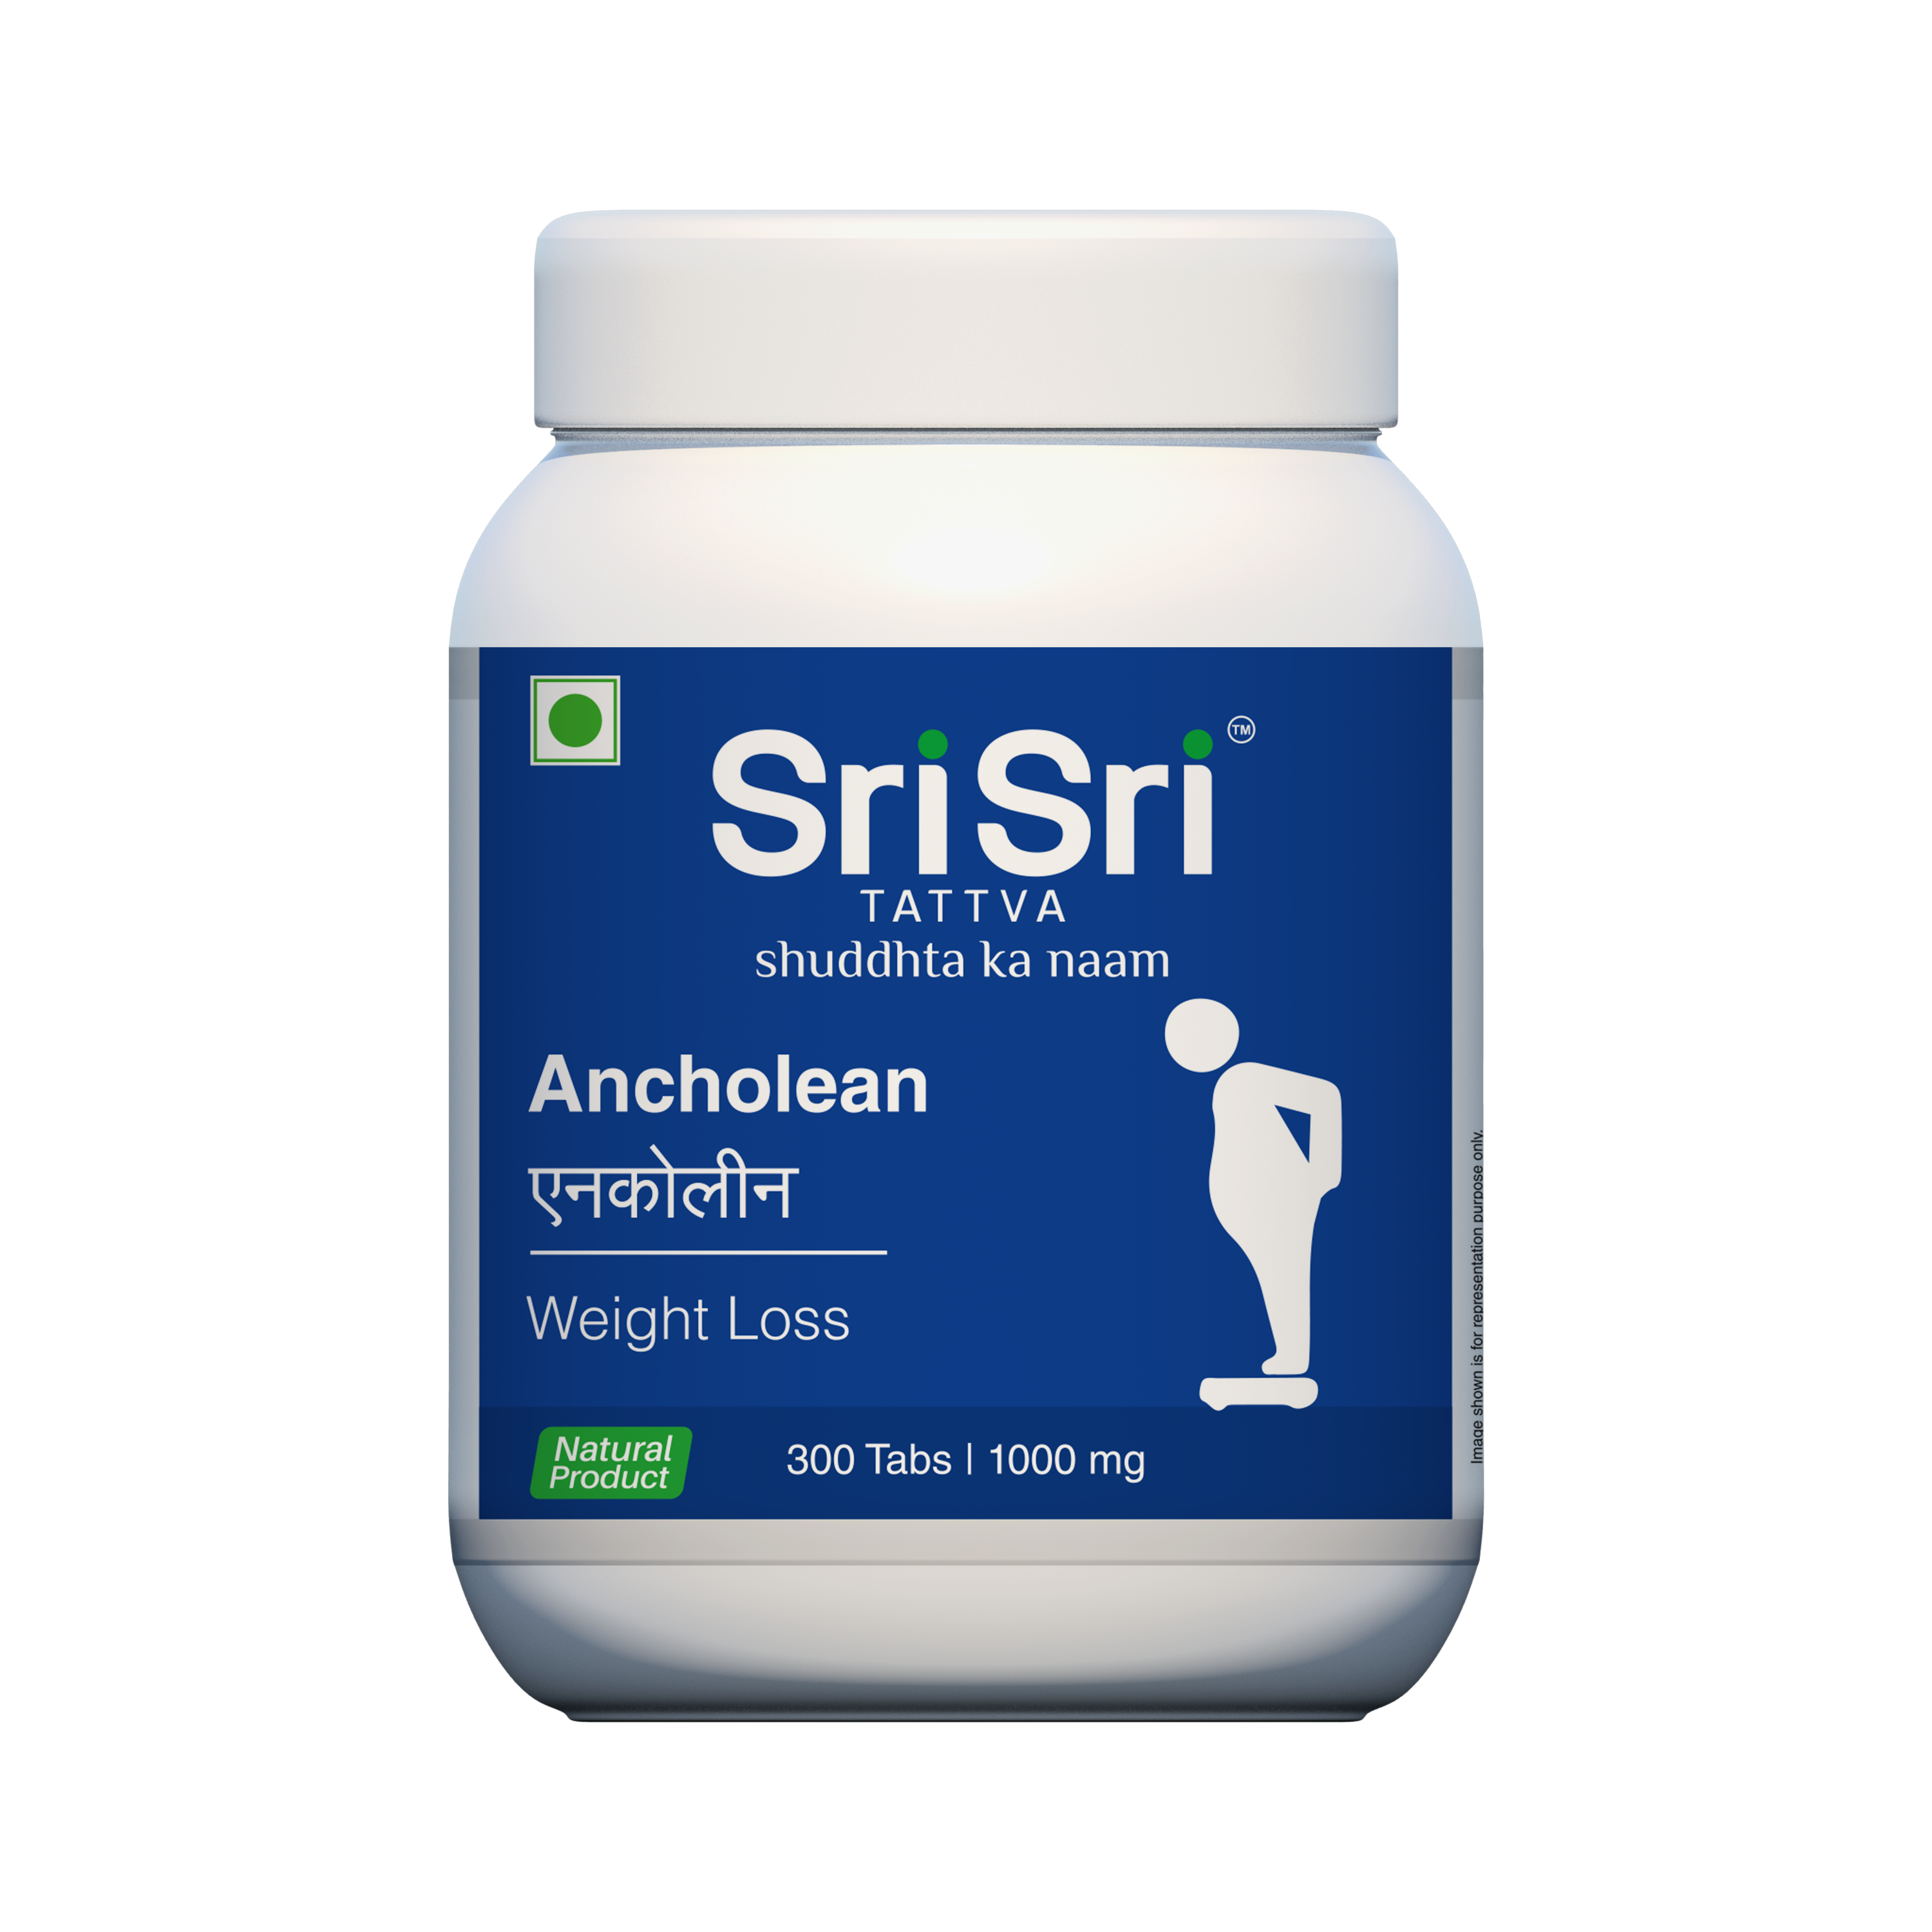 Ancholean - Weight Loss | An Effective, Safe & Natural Way Of Weight Management & A Supplement In Hypercholesterolemia | 300 Tabs, 1000 mg